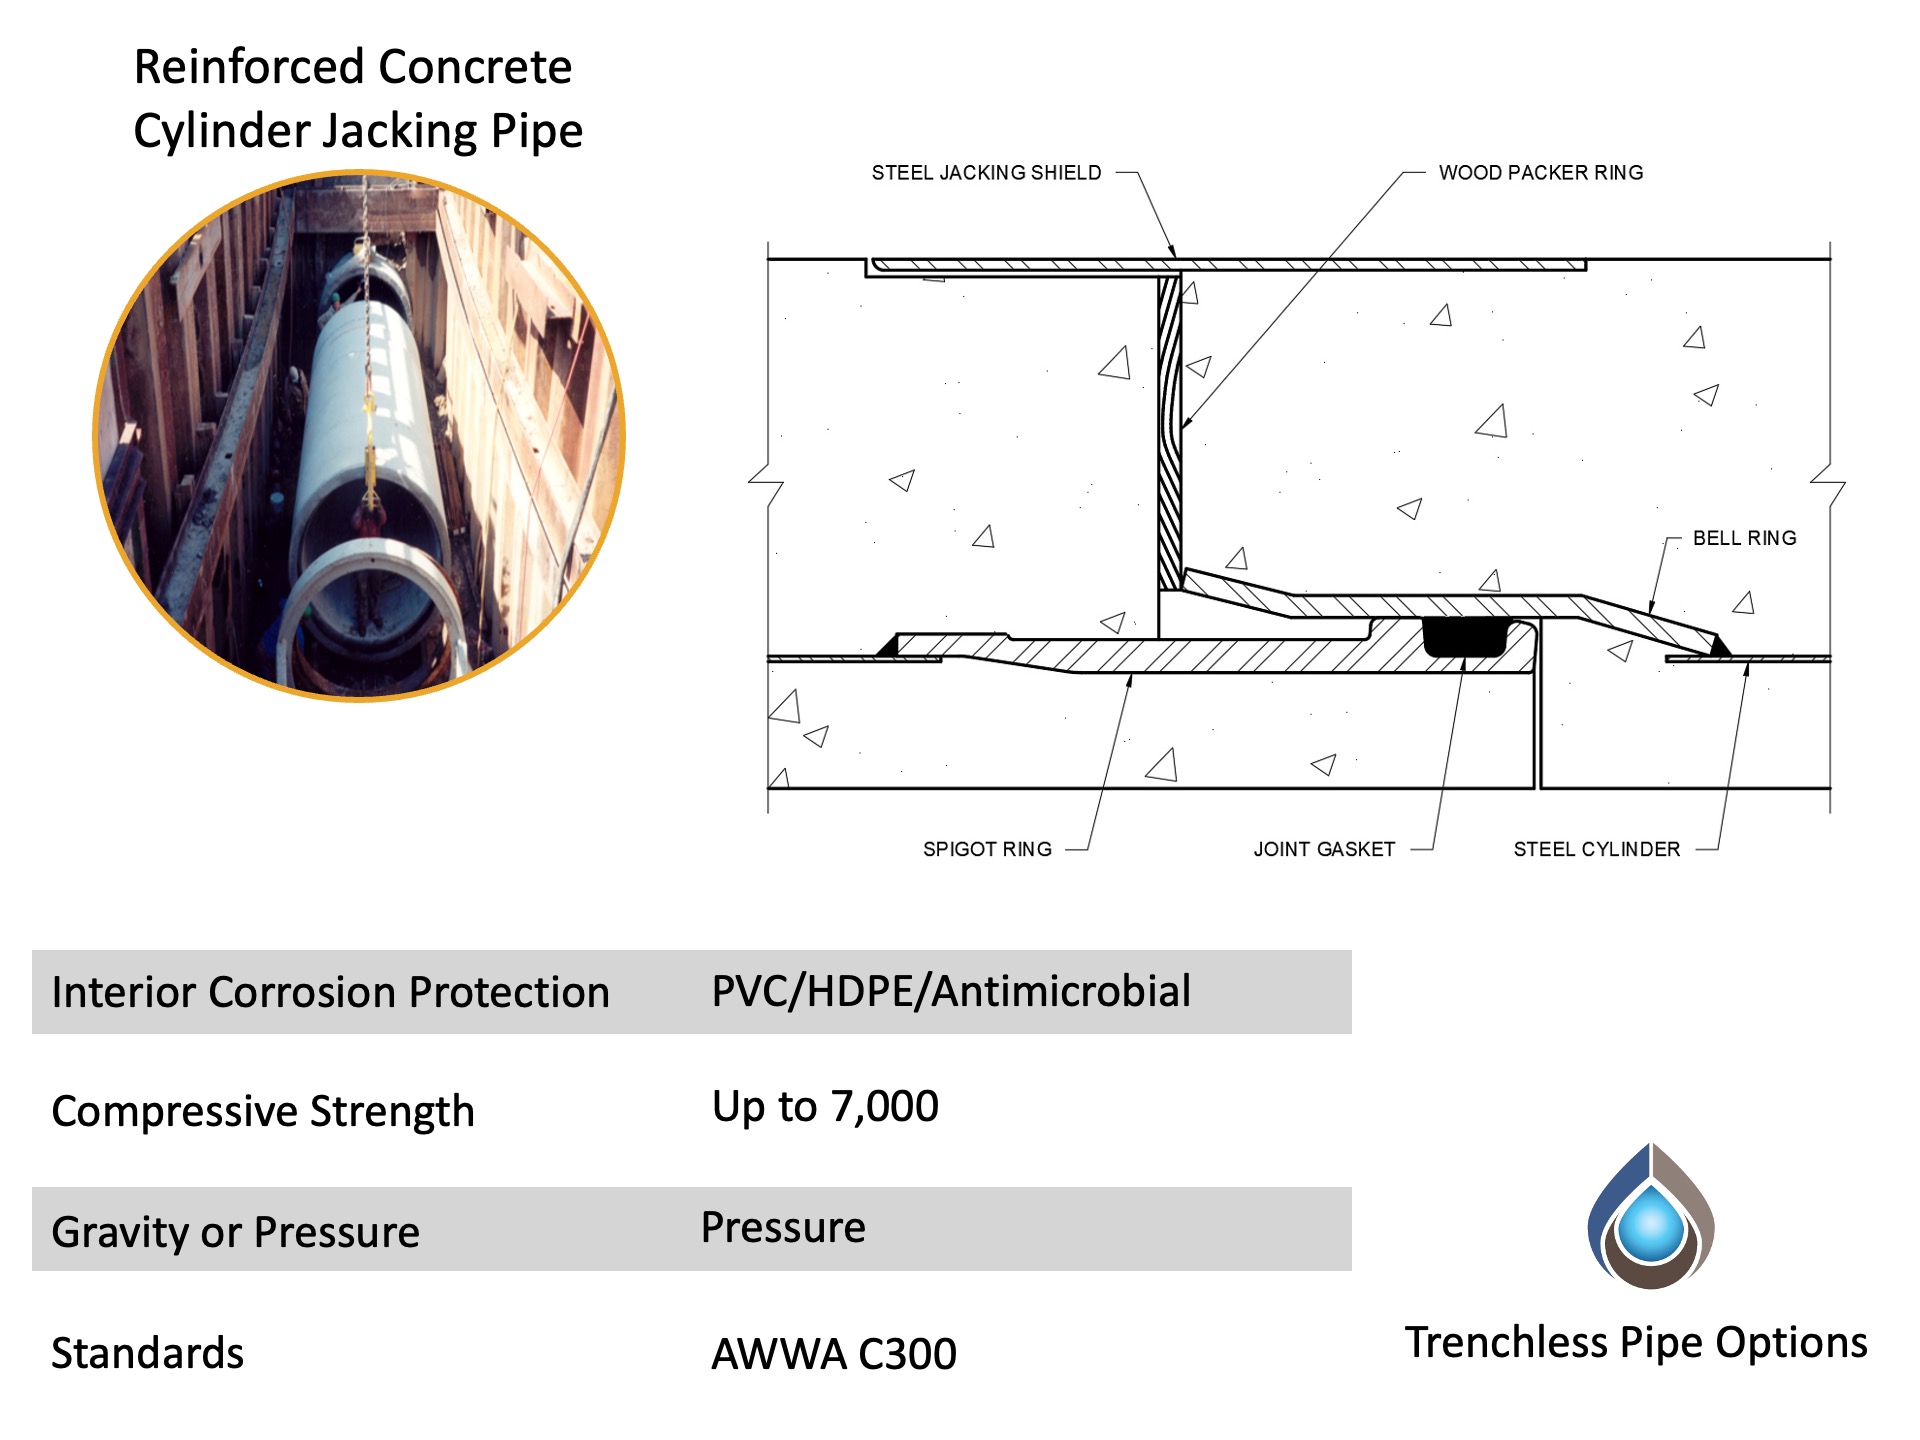 Trenchless Pipe Options 3